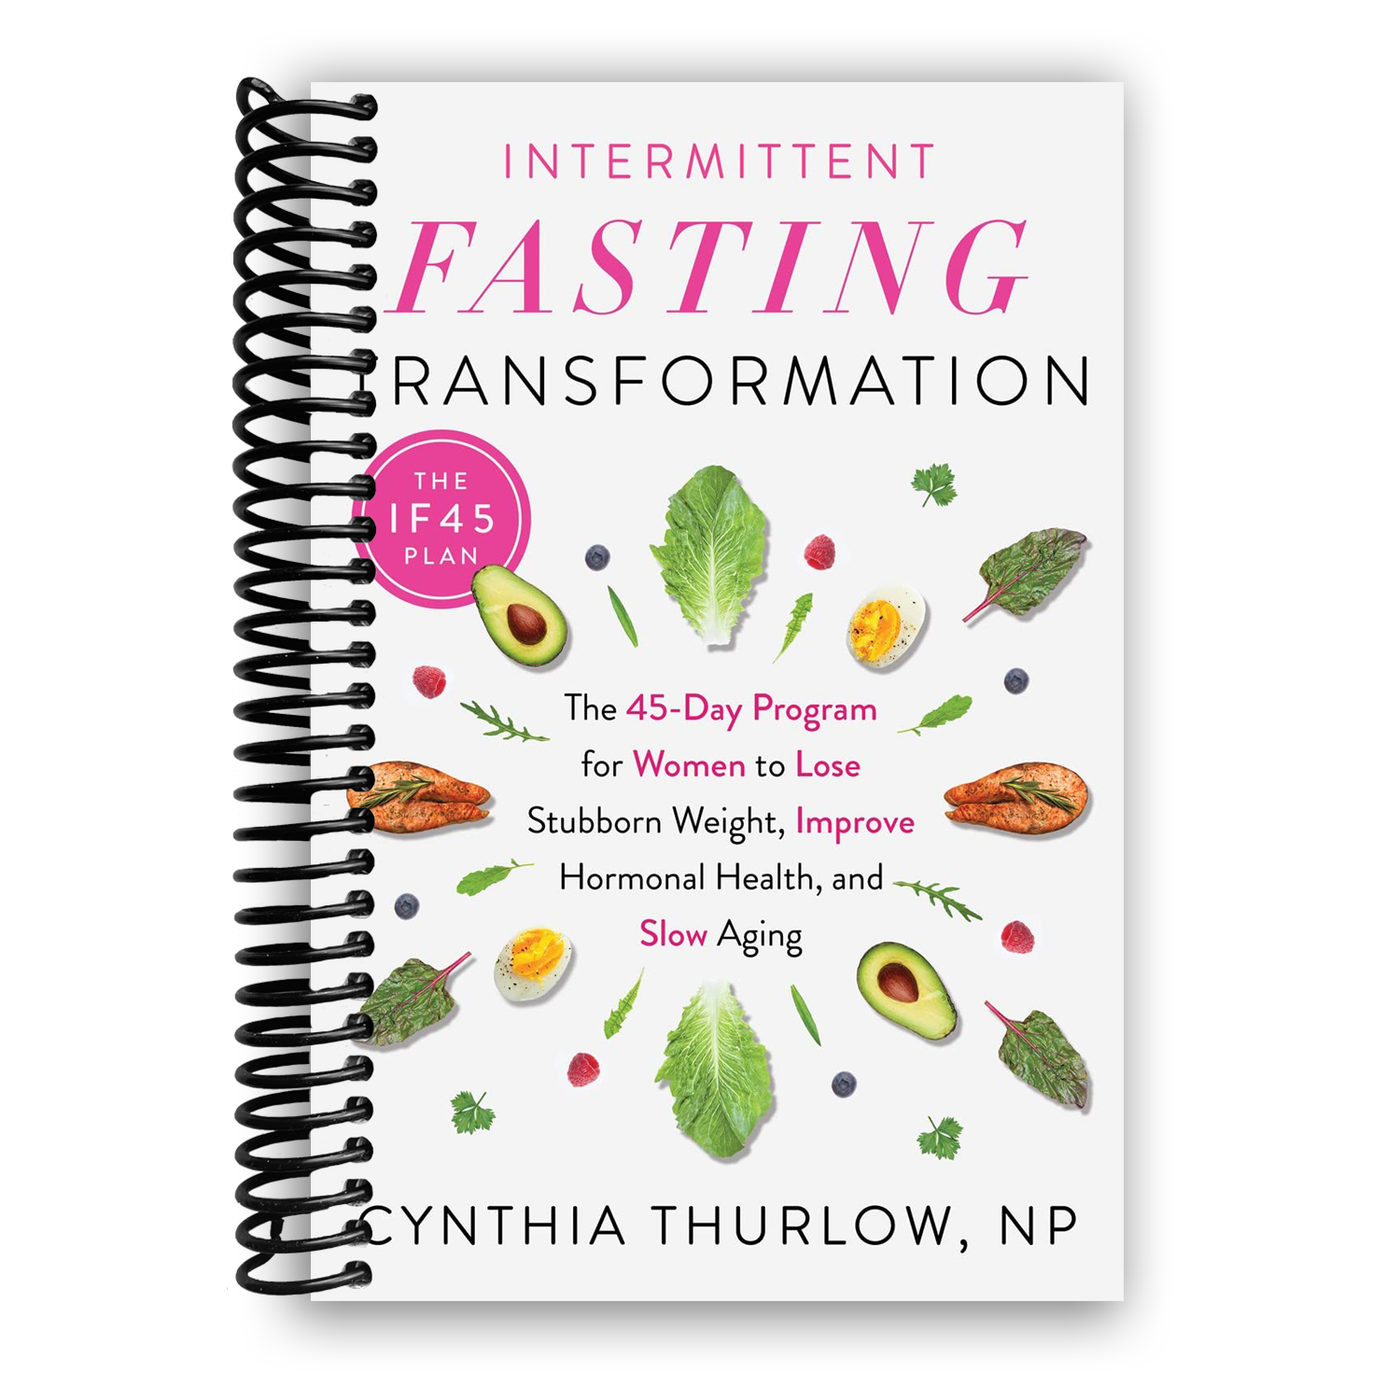 Front Cover of Intermittent Fasting Transformation: The 45-Day Program for Women to Lose Stubborn Weight, Improve Hormonal Health, and Slow Aging